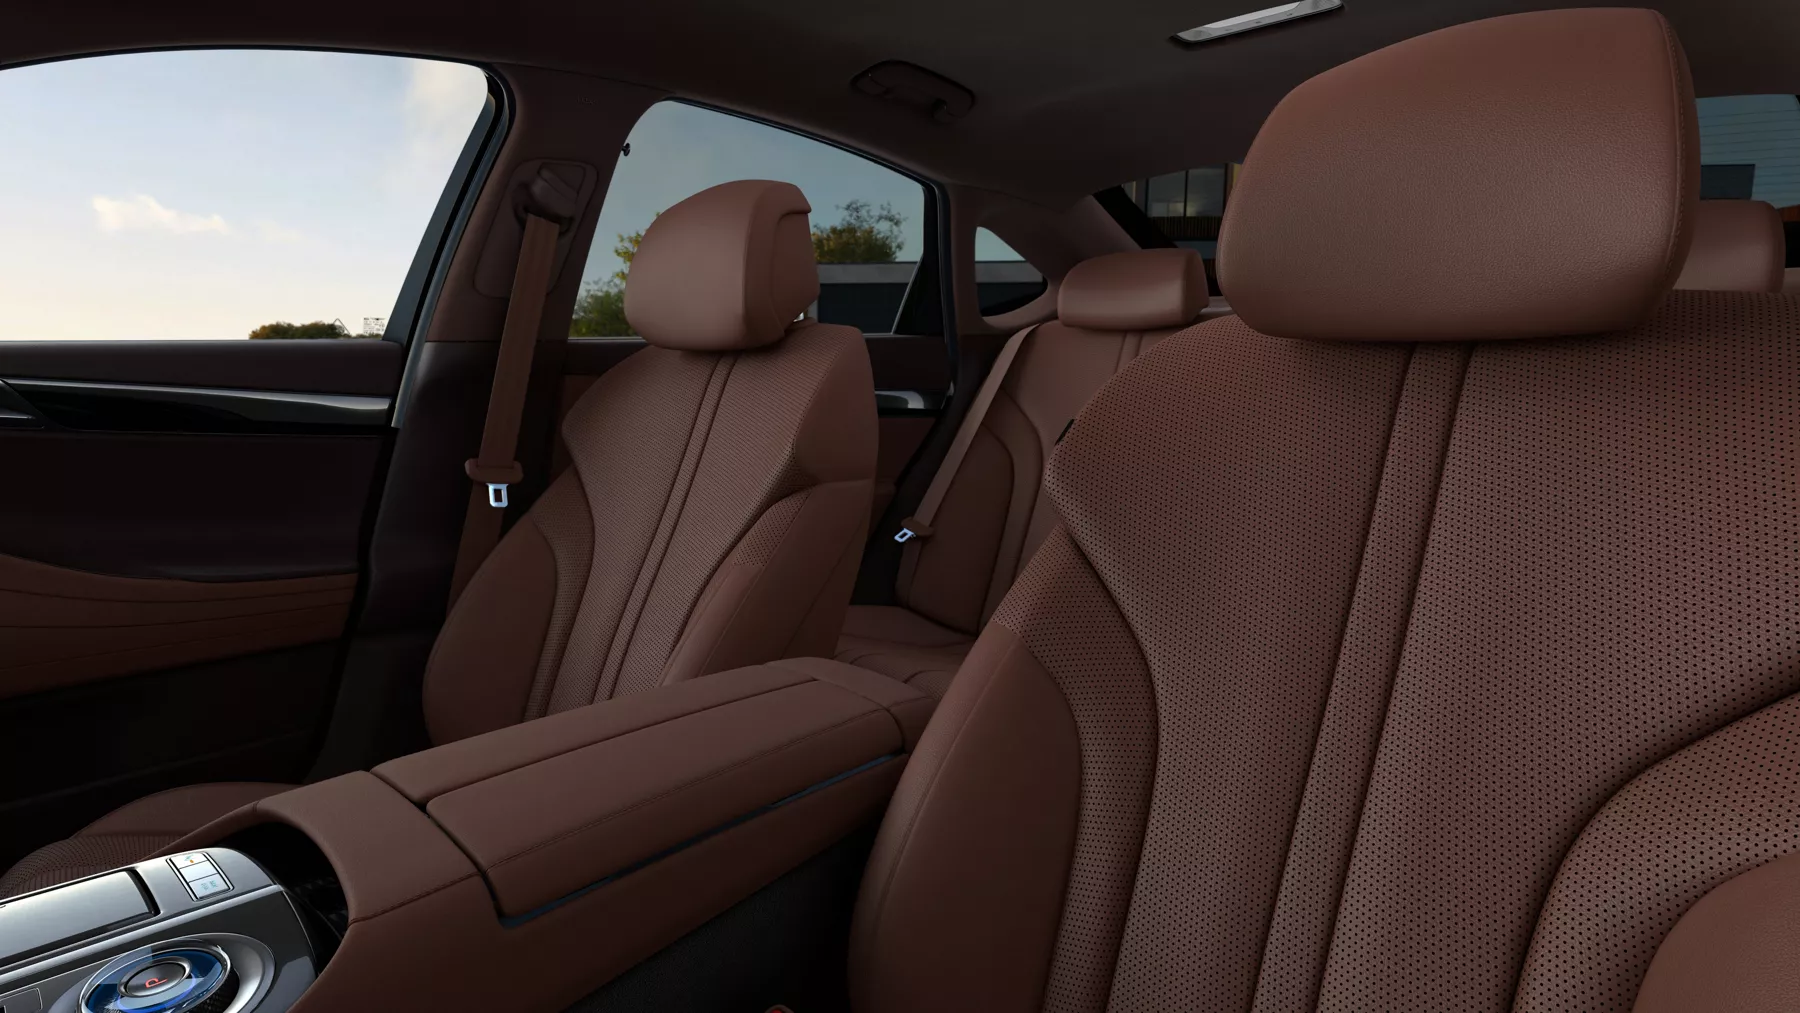 G80 front seats in brown color. 